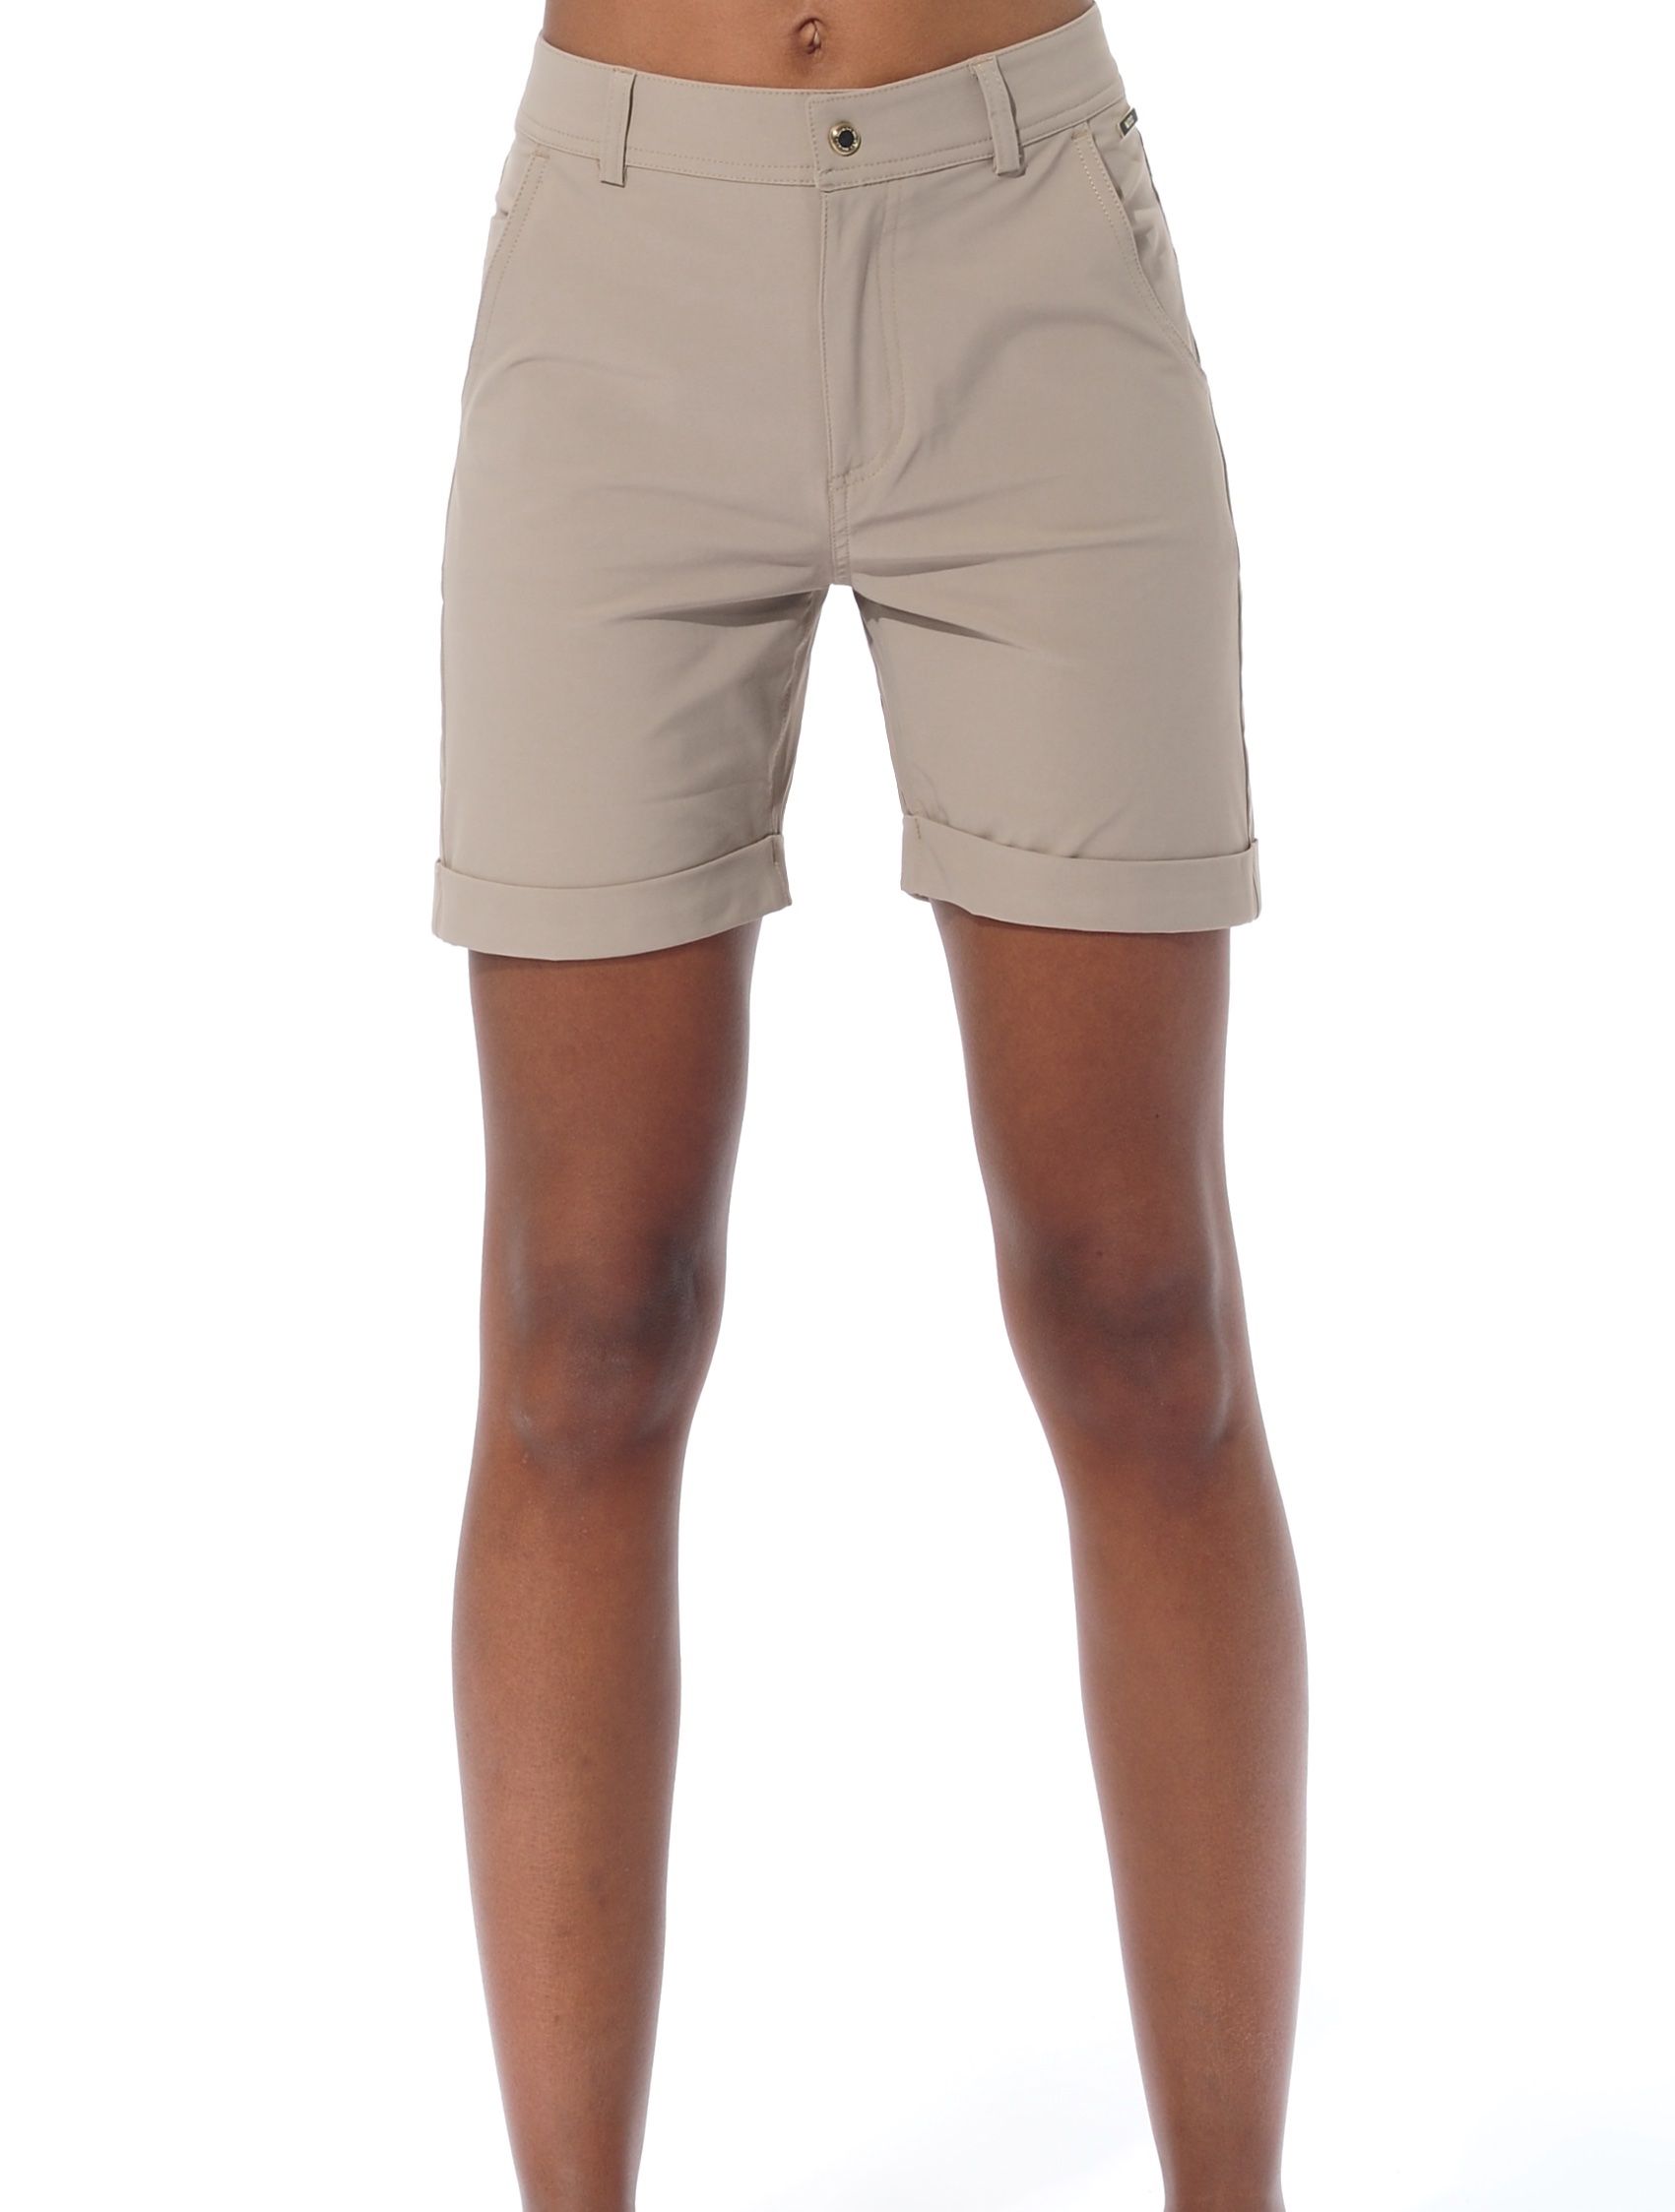 4way stretch shorts taupe 